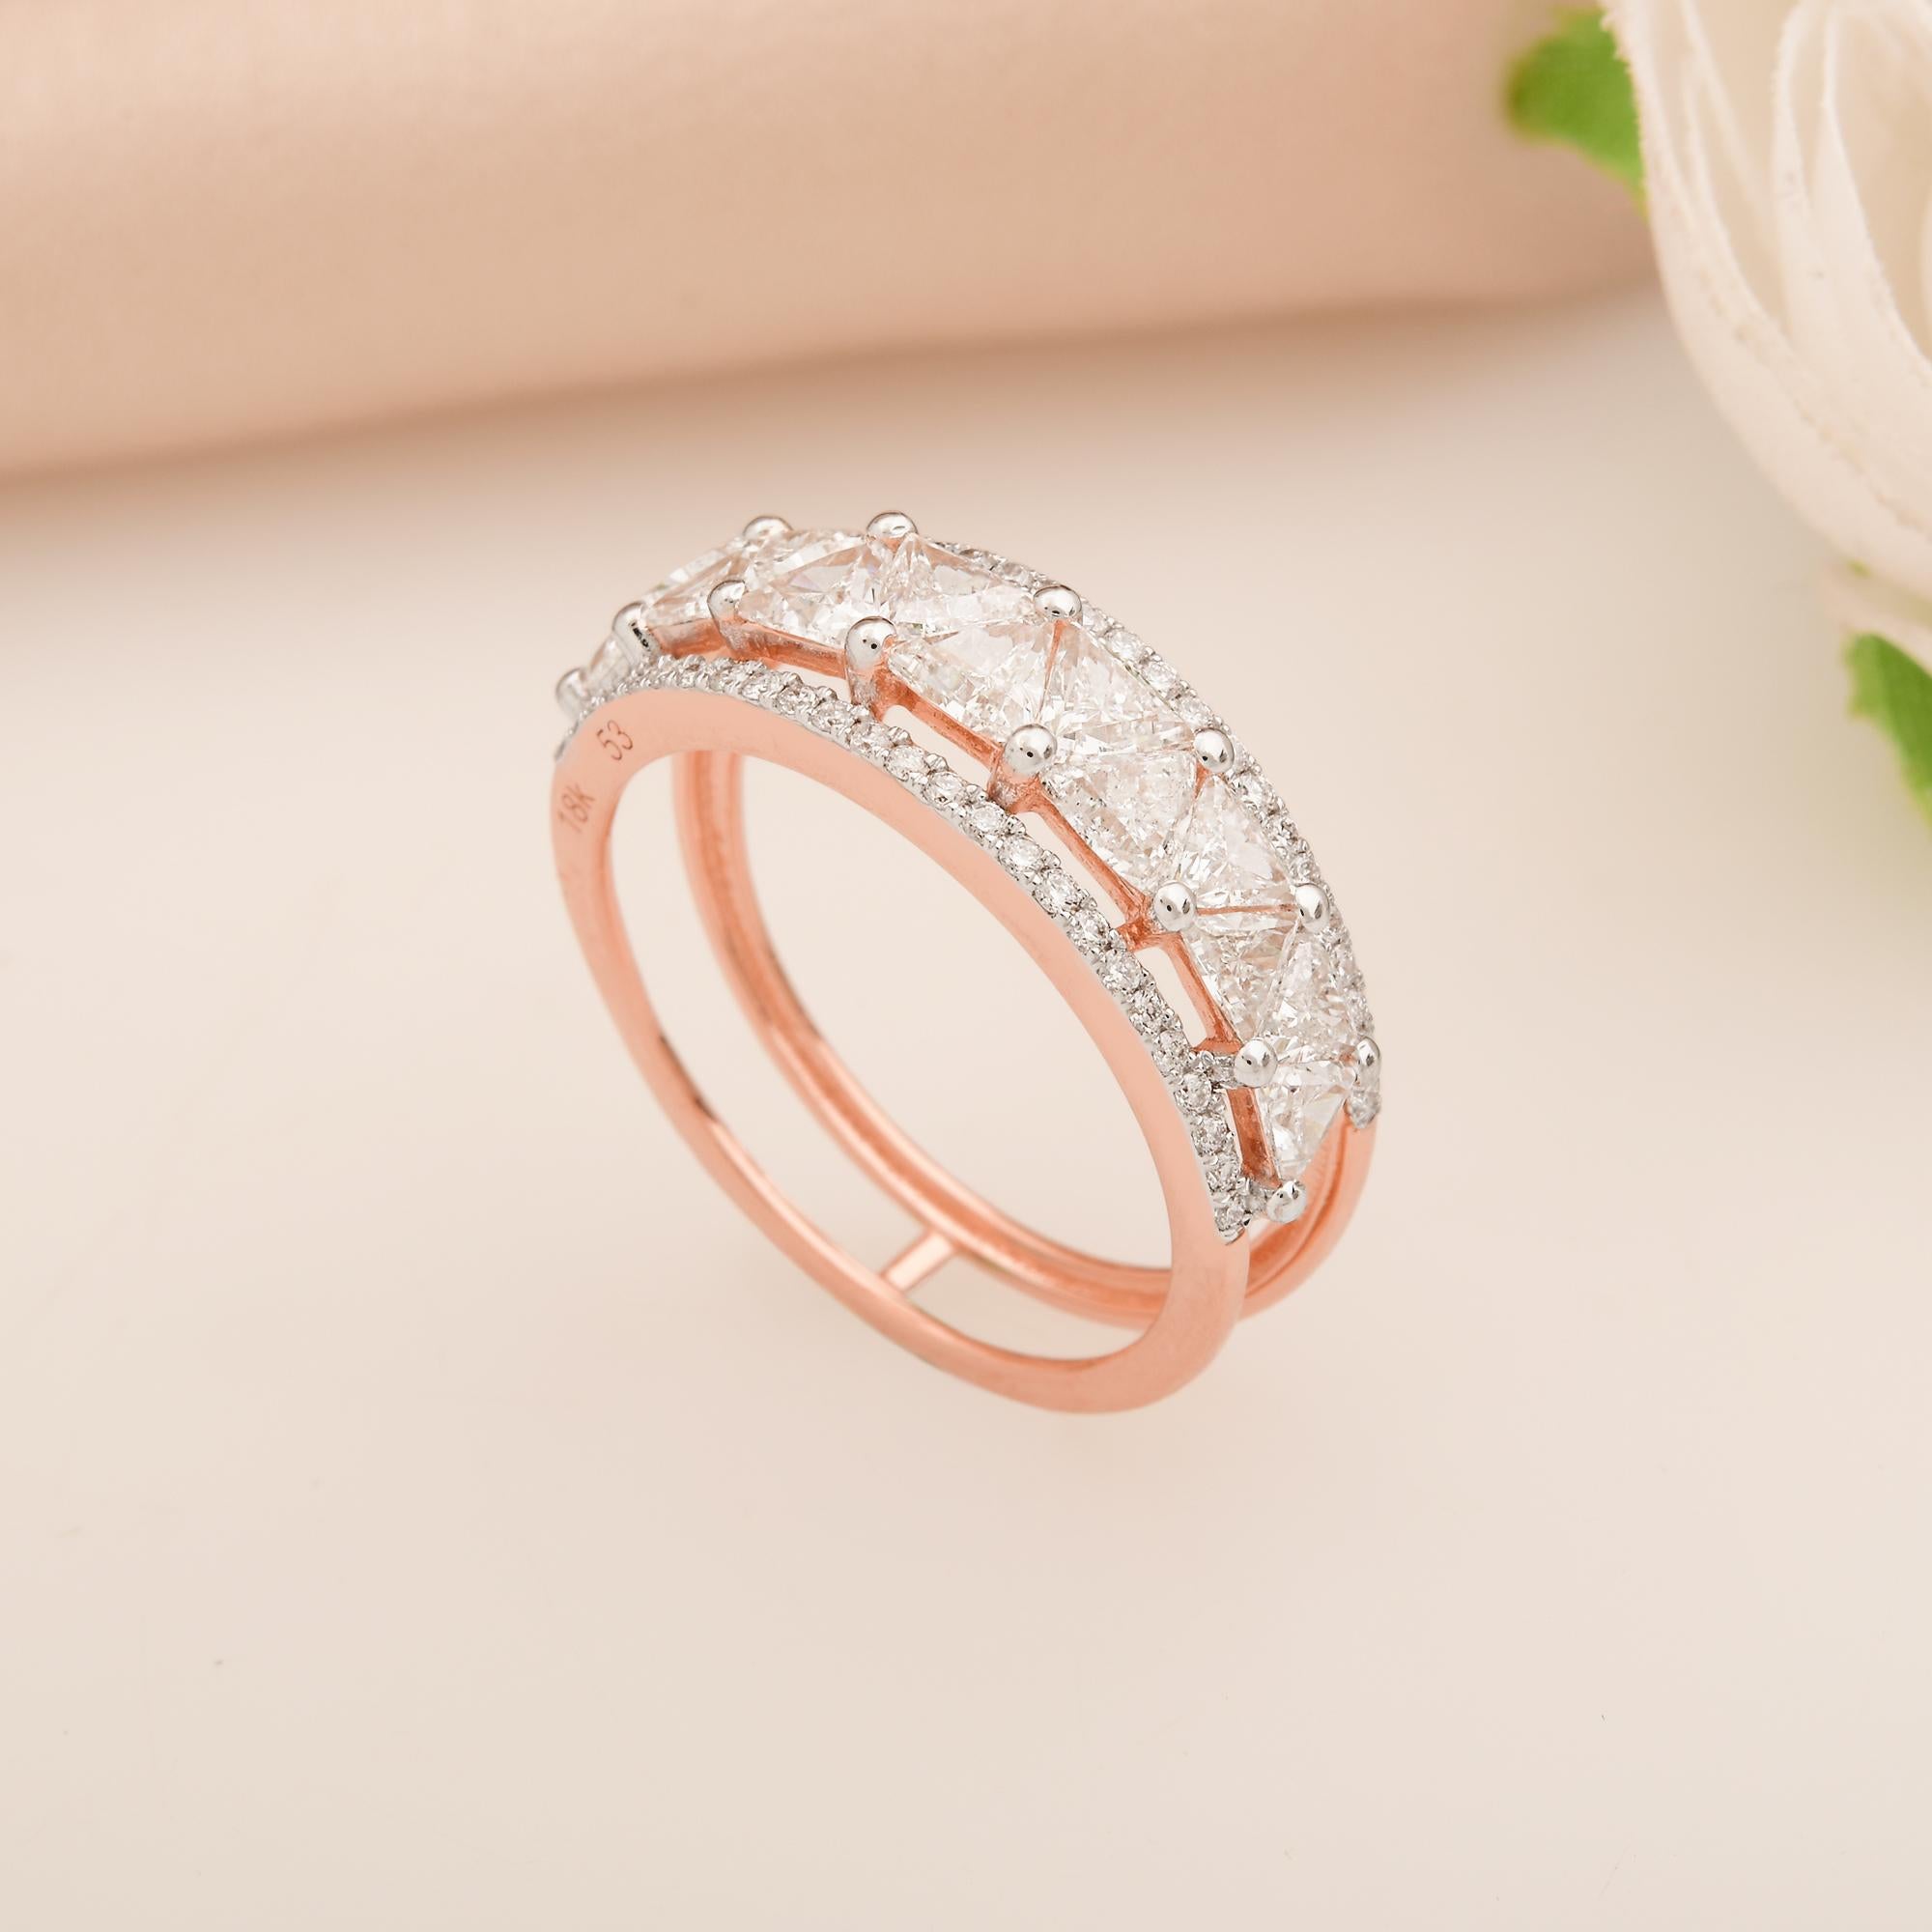 For Sale:  1.4 Ct SI Clarity HI Color Trillion Round Diamond Dome Ring 18 Karat Rose Gold 5